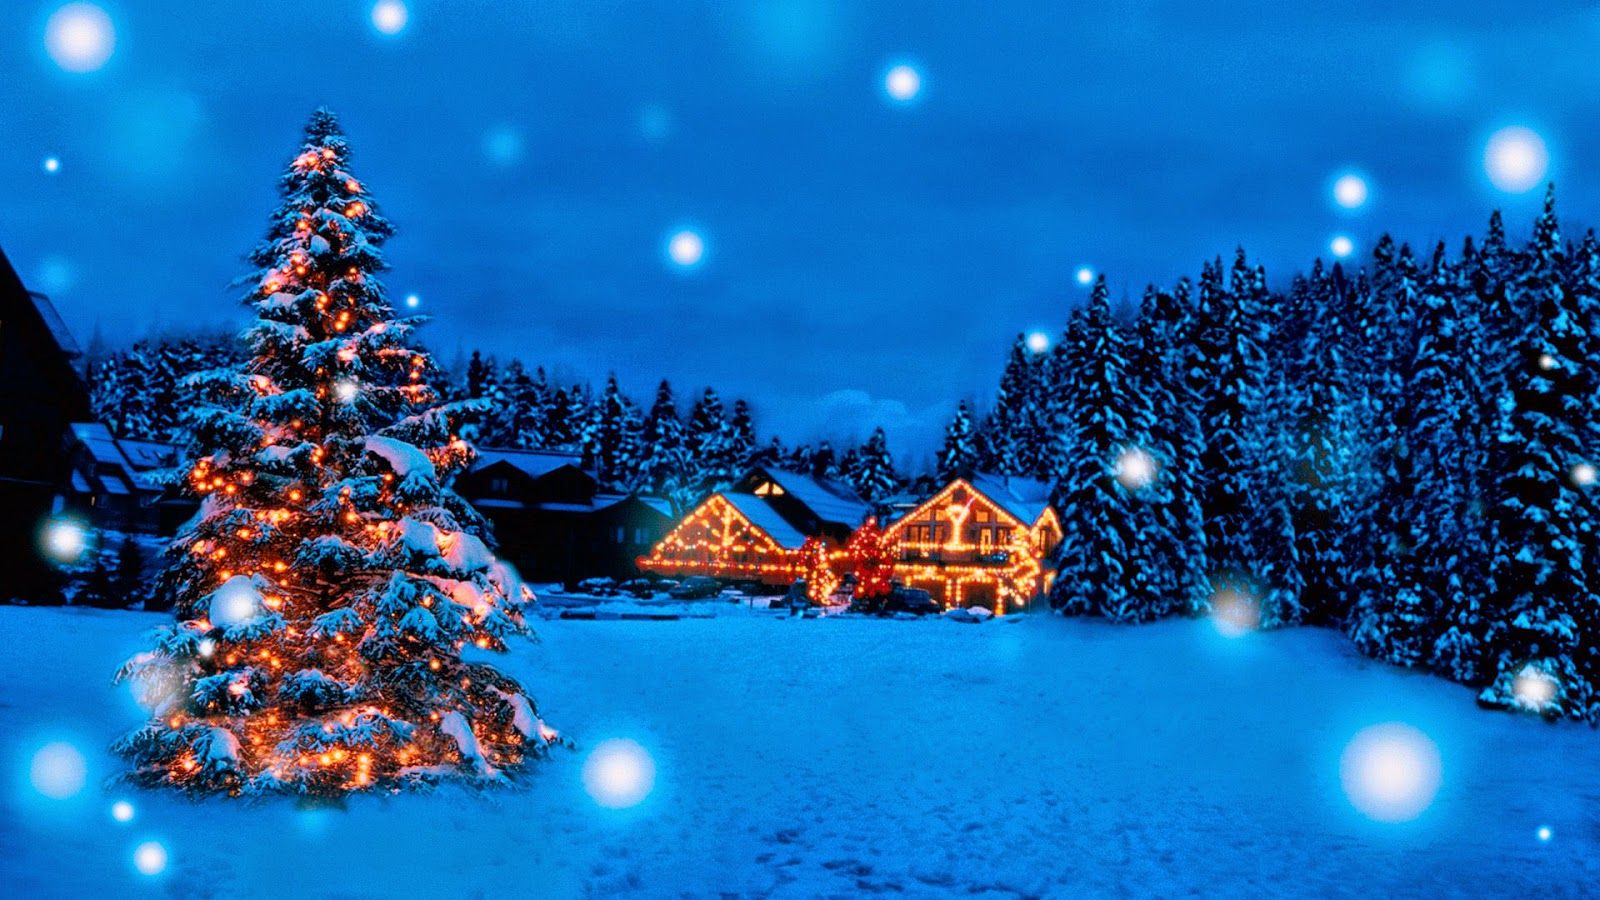 Winter Christmas Wallpaper For Puter Image In Collection